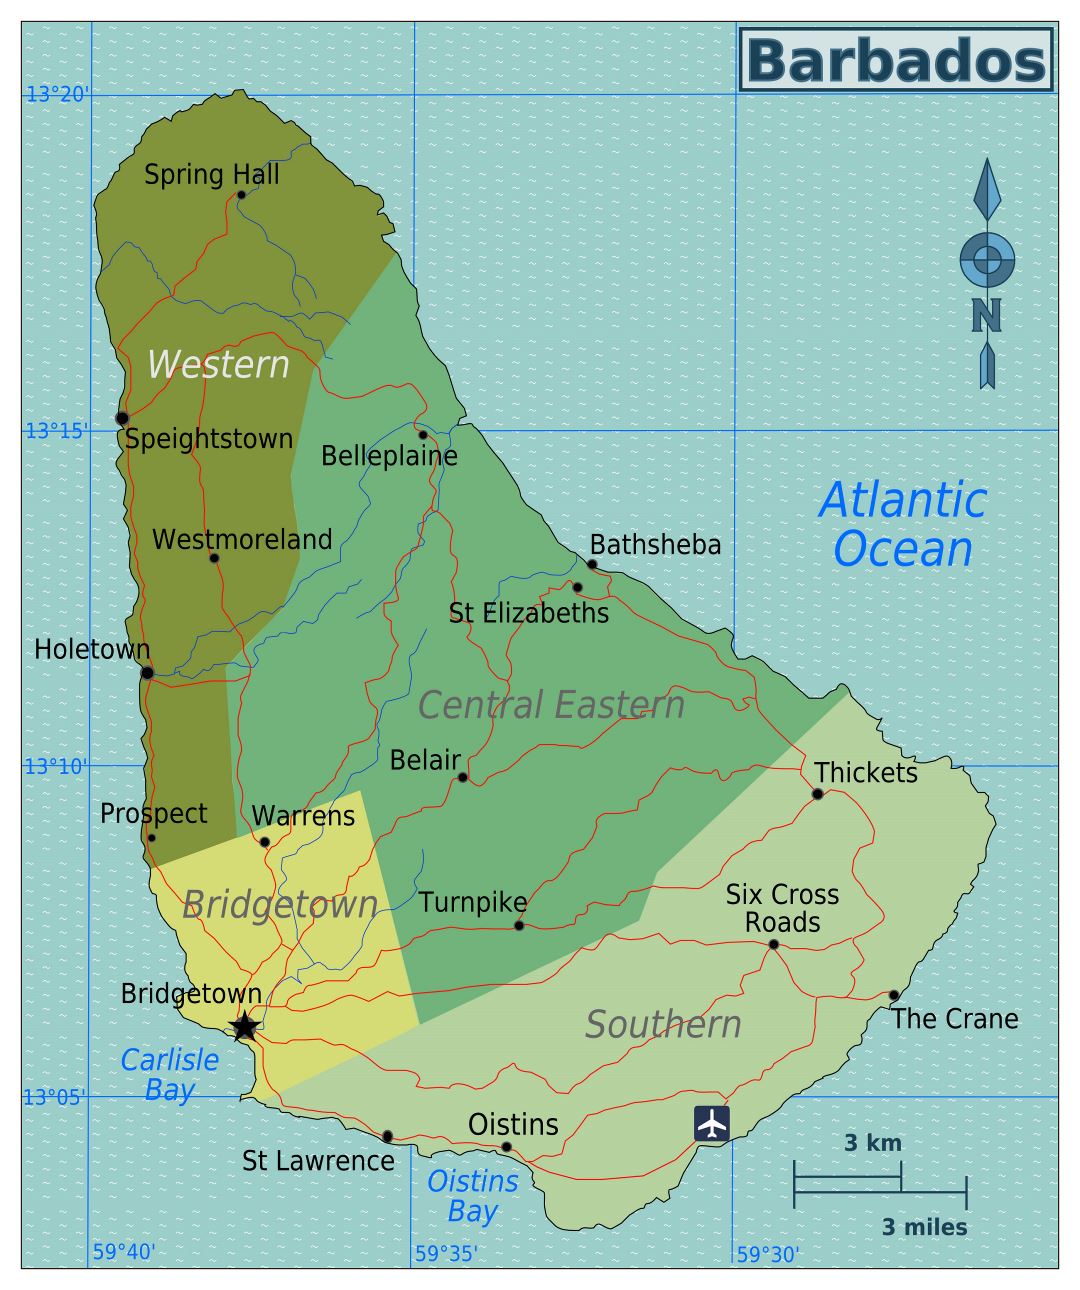 Large regions map of Barbados